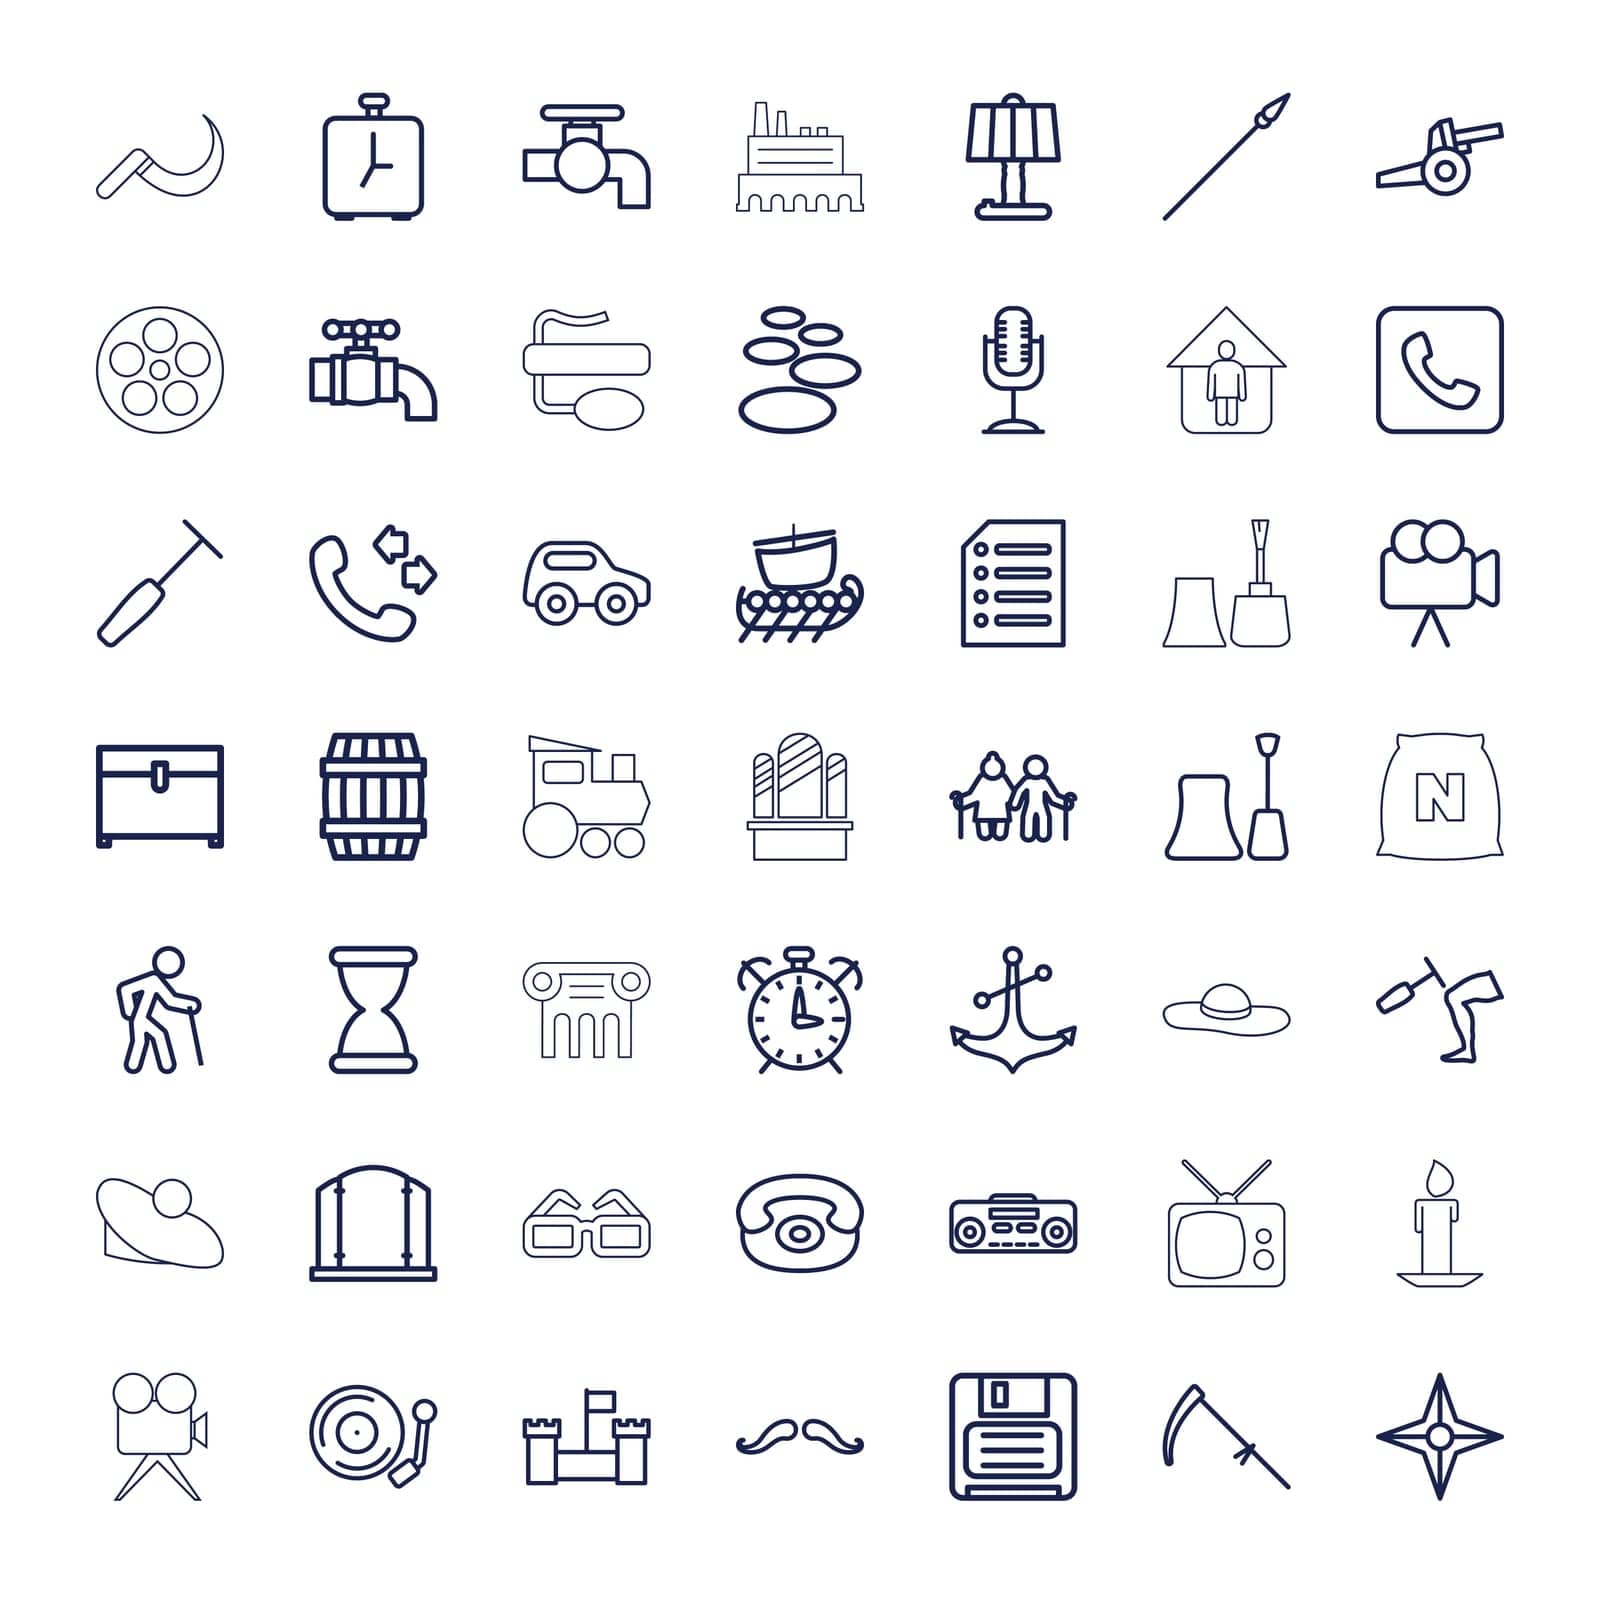 scythe,couple,tv,woman,sack,castle,hammer,icon,diskette,mustache,glasses,gramophone,paper,record,hourglass,alarm,hat,vector,man,camera,player,train,toy,greek,barrel,chest,set,reaction,nail,old,column,check,water,knee,phone,compass,candle,desk,anchor,gate,polish by ogqcorp